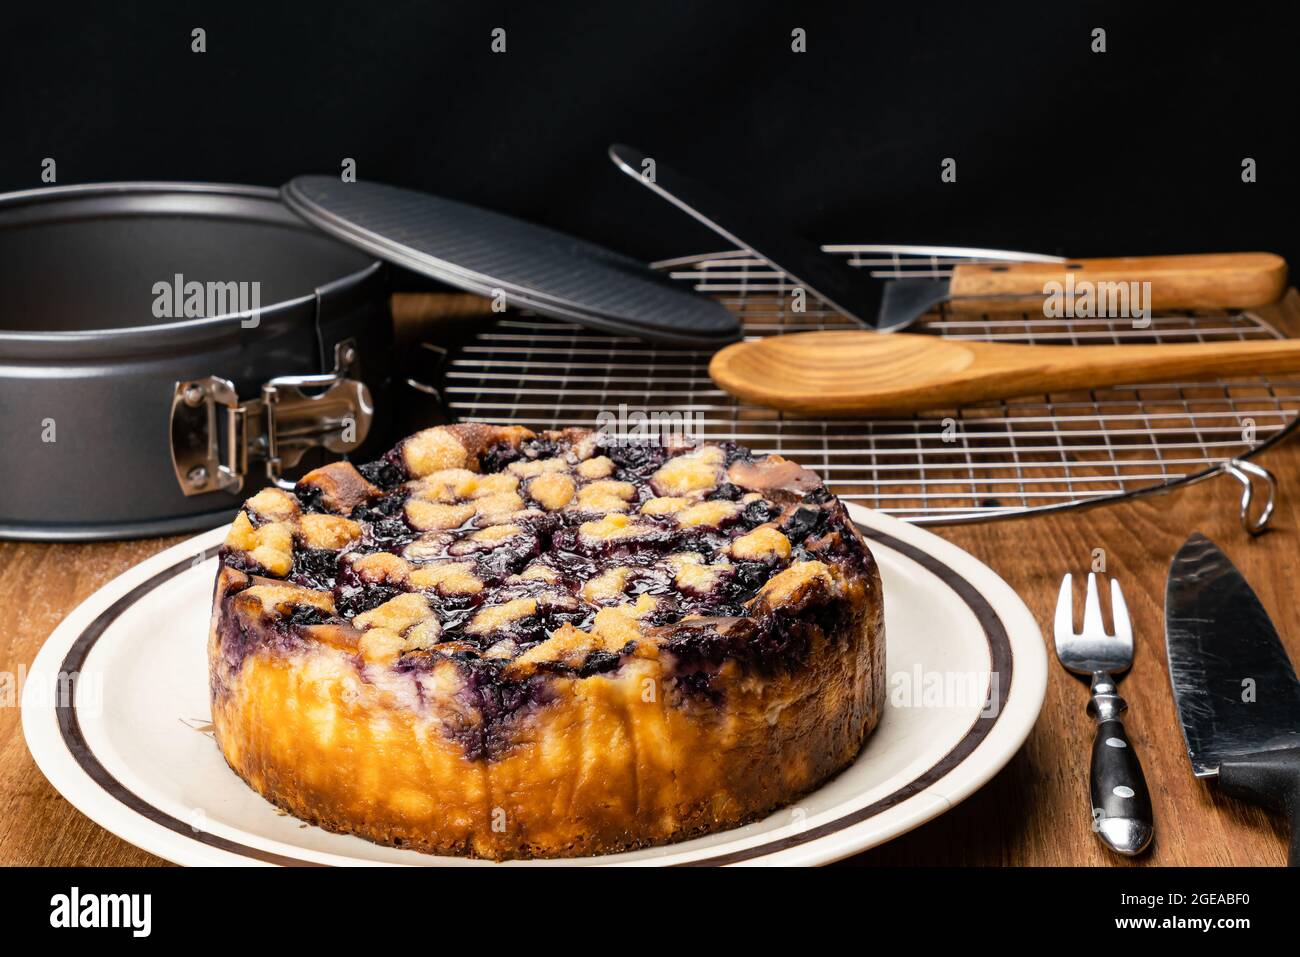 Side view of delicious homemade blueberry and crumble cheesecake in brown ceramic plate with wooden spoon, serving shovel on cooling rack, metal fork Stock Photo